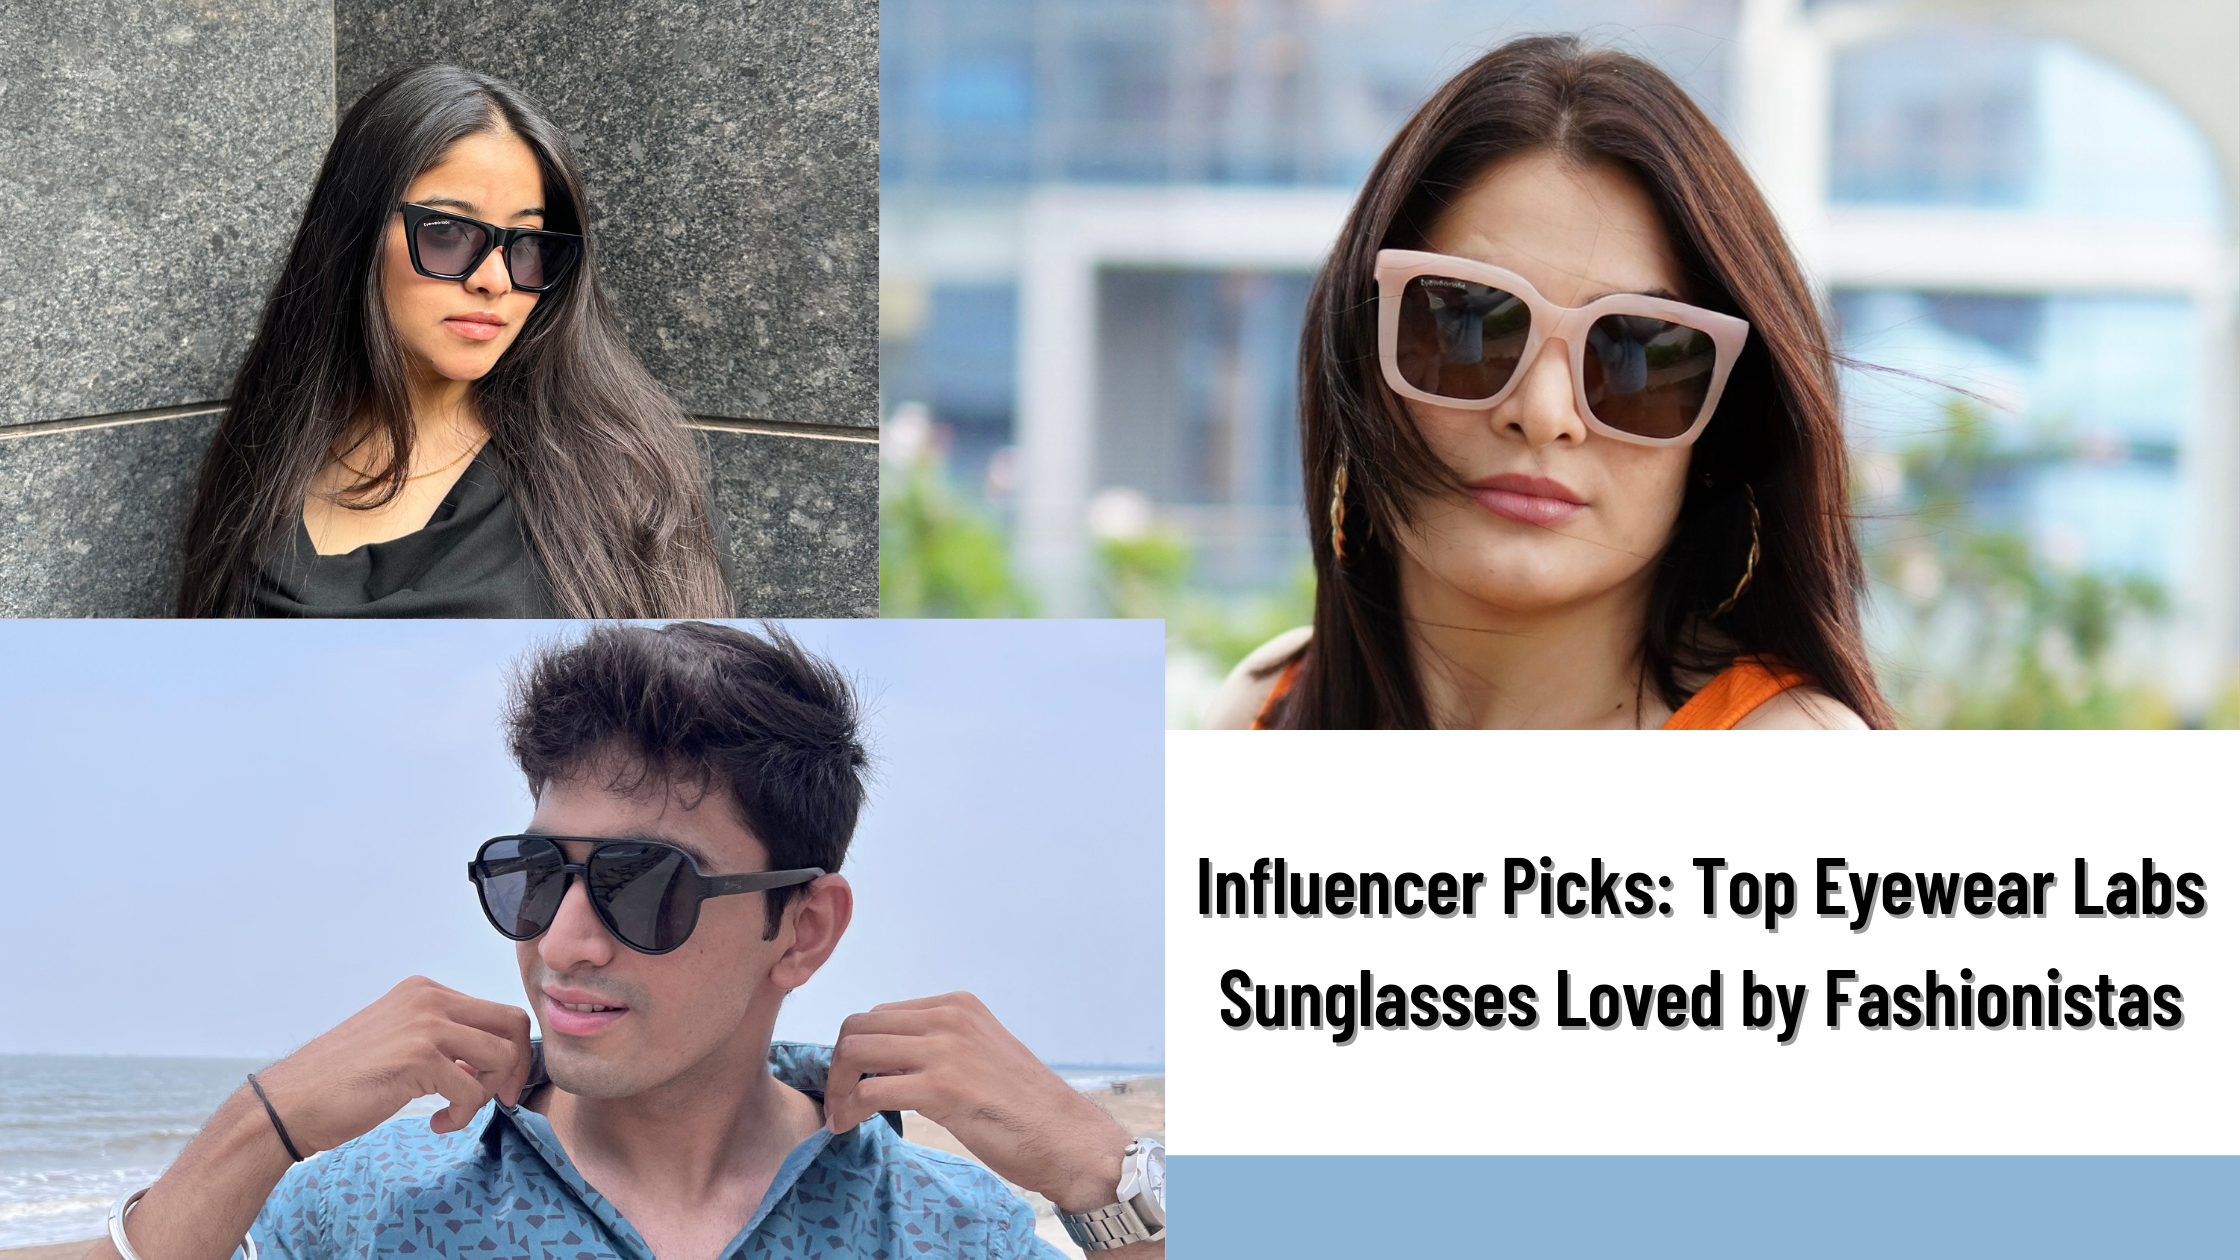 Influencer Picks: Top Eyewear Labs Sunglasses Loved by Fashionistas